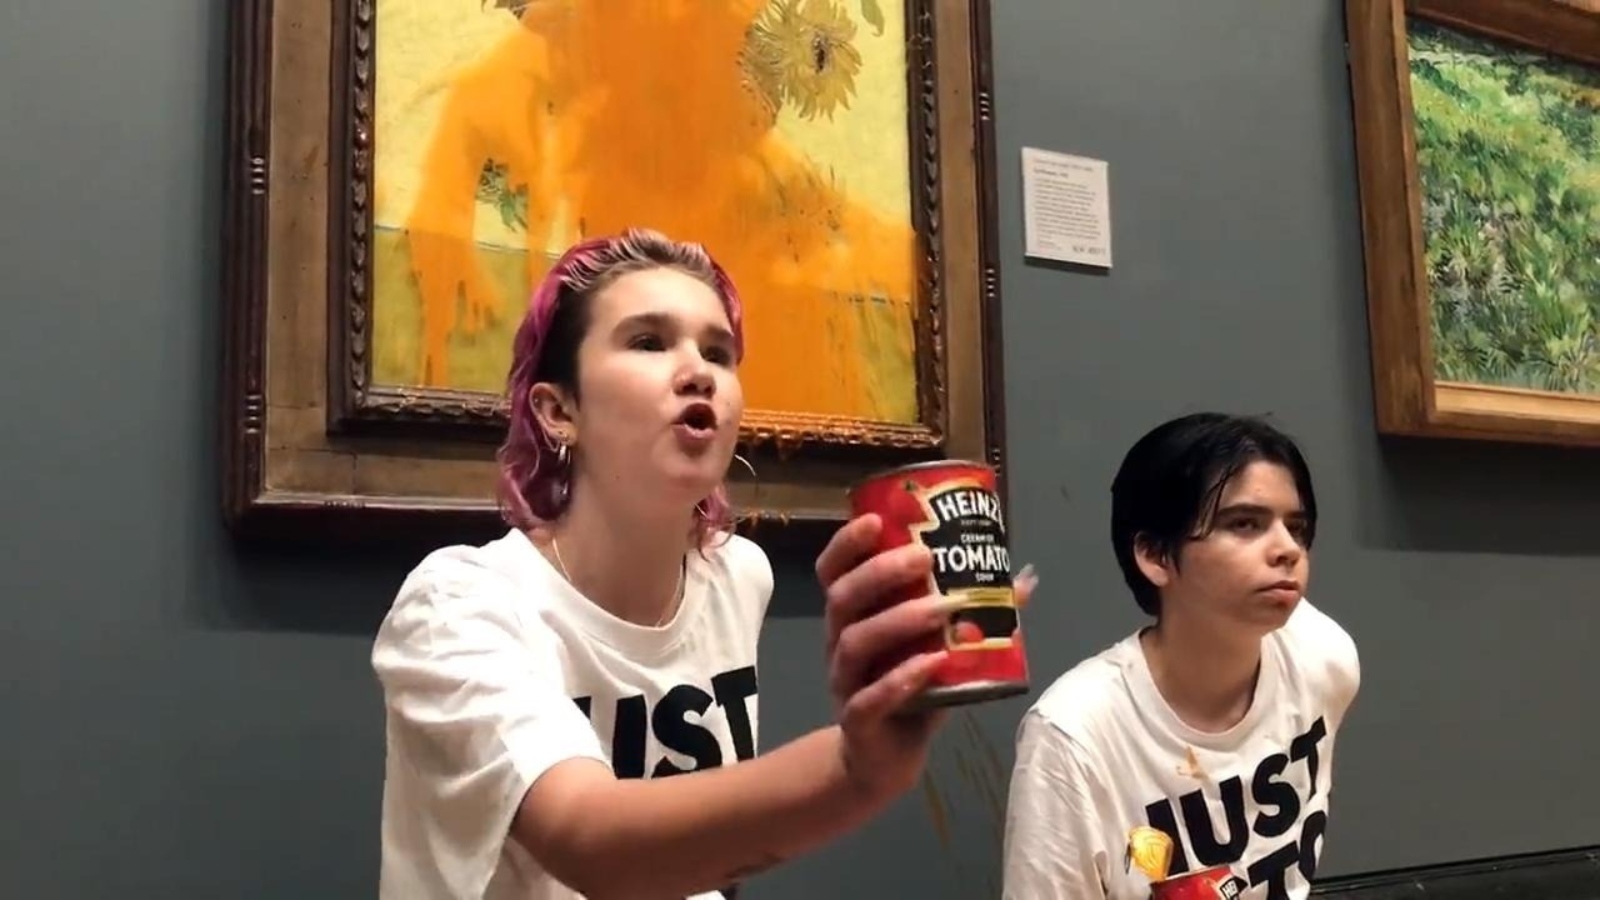 Two protesters in Just Stop Oil T-shirts are glued to a wall next to a painting covered with soup.